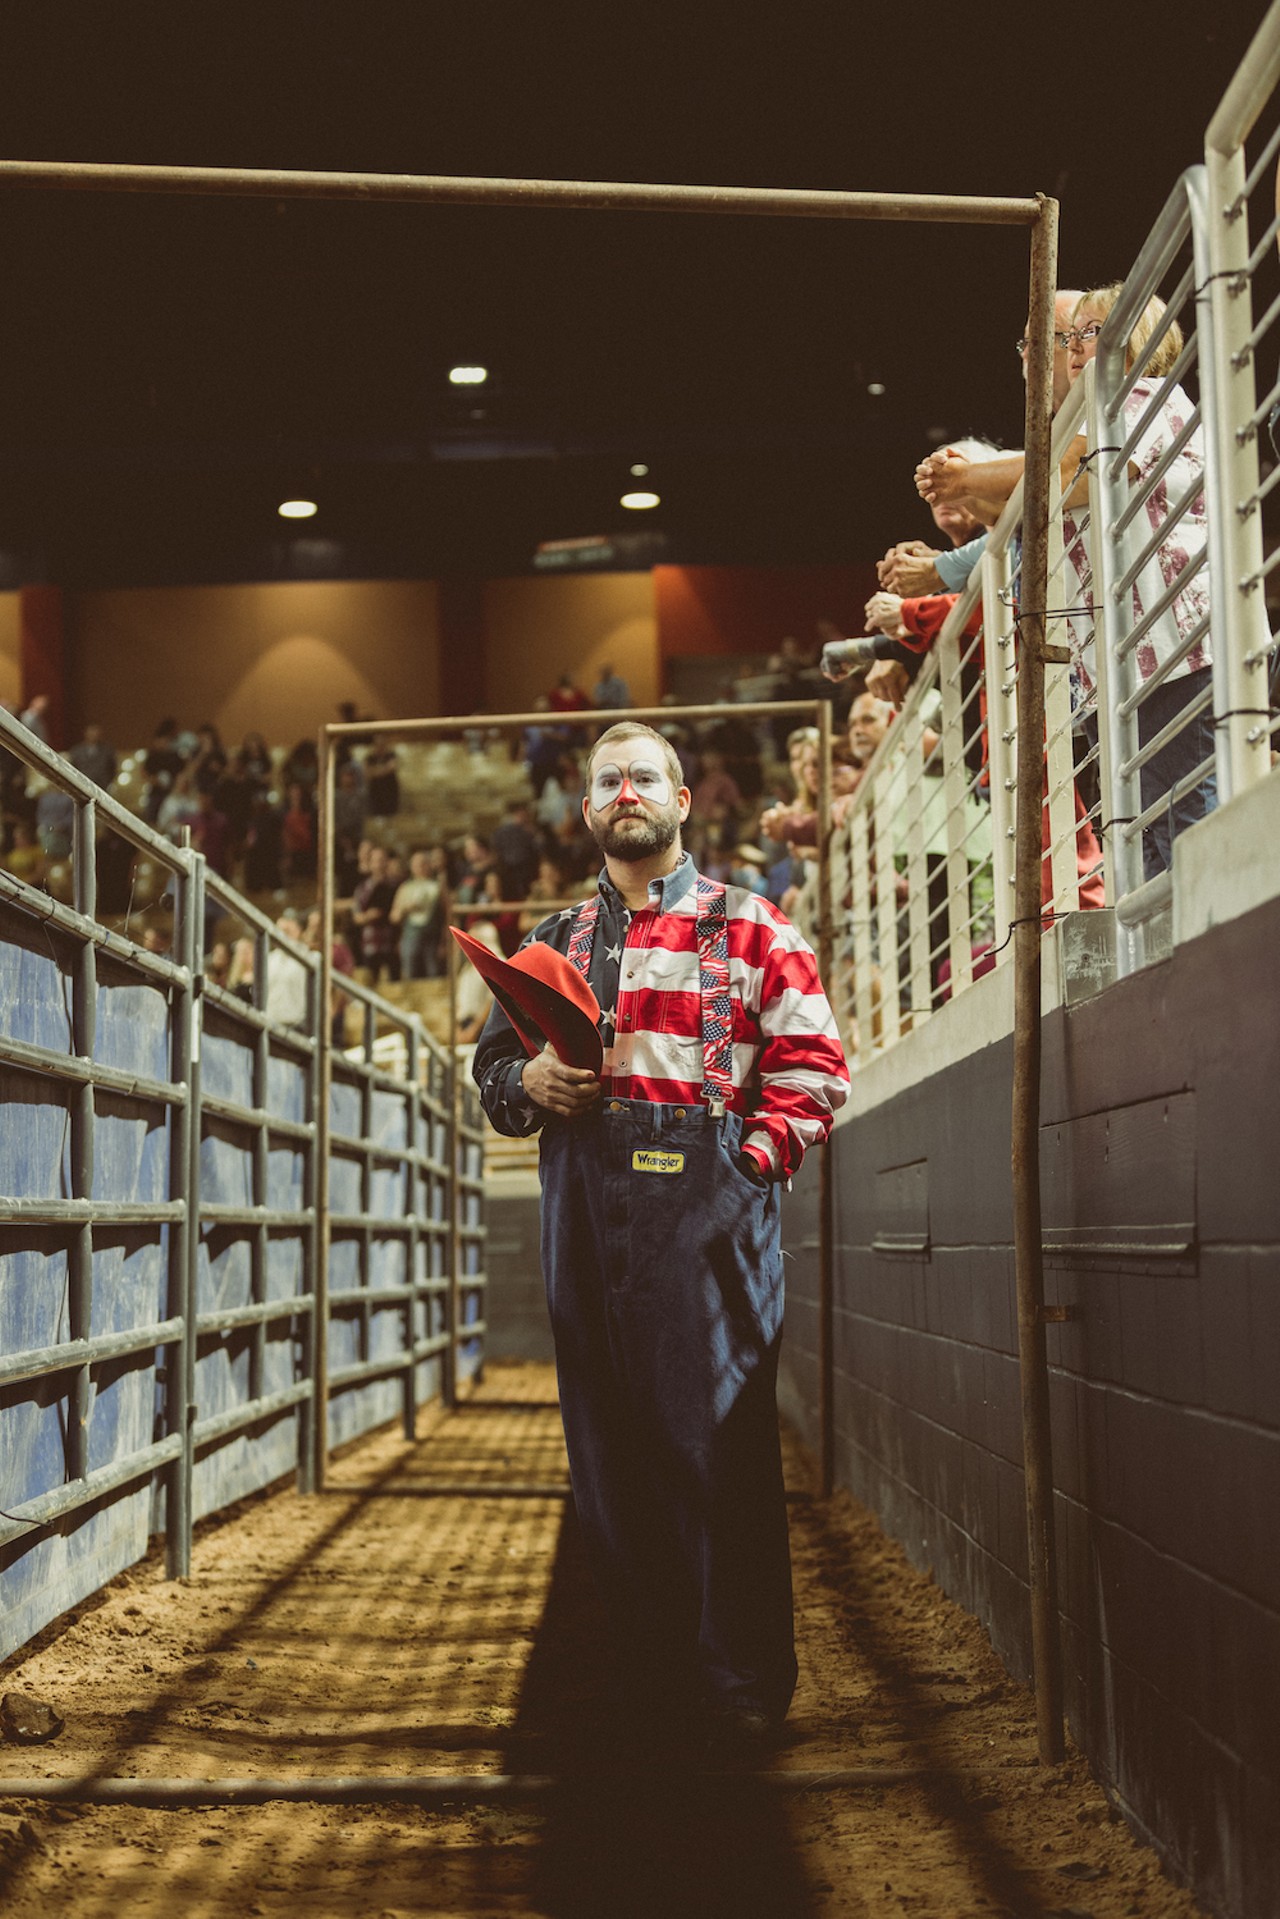 Clint Parrish, rodeo clown and barrelman, waits for the national anthem to end to start his pre-show act.